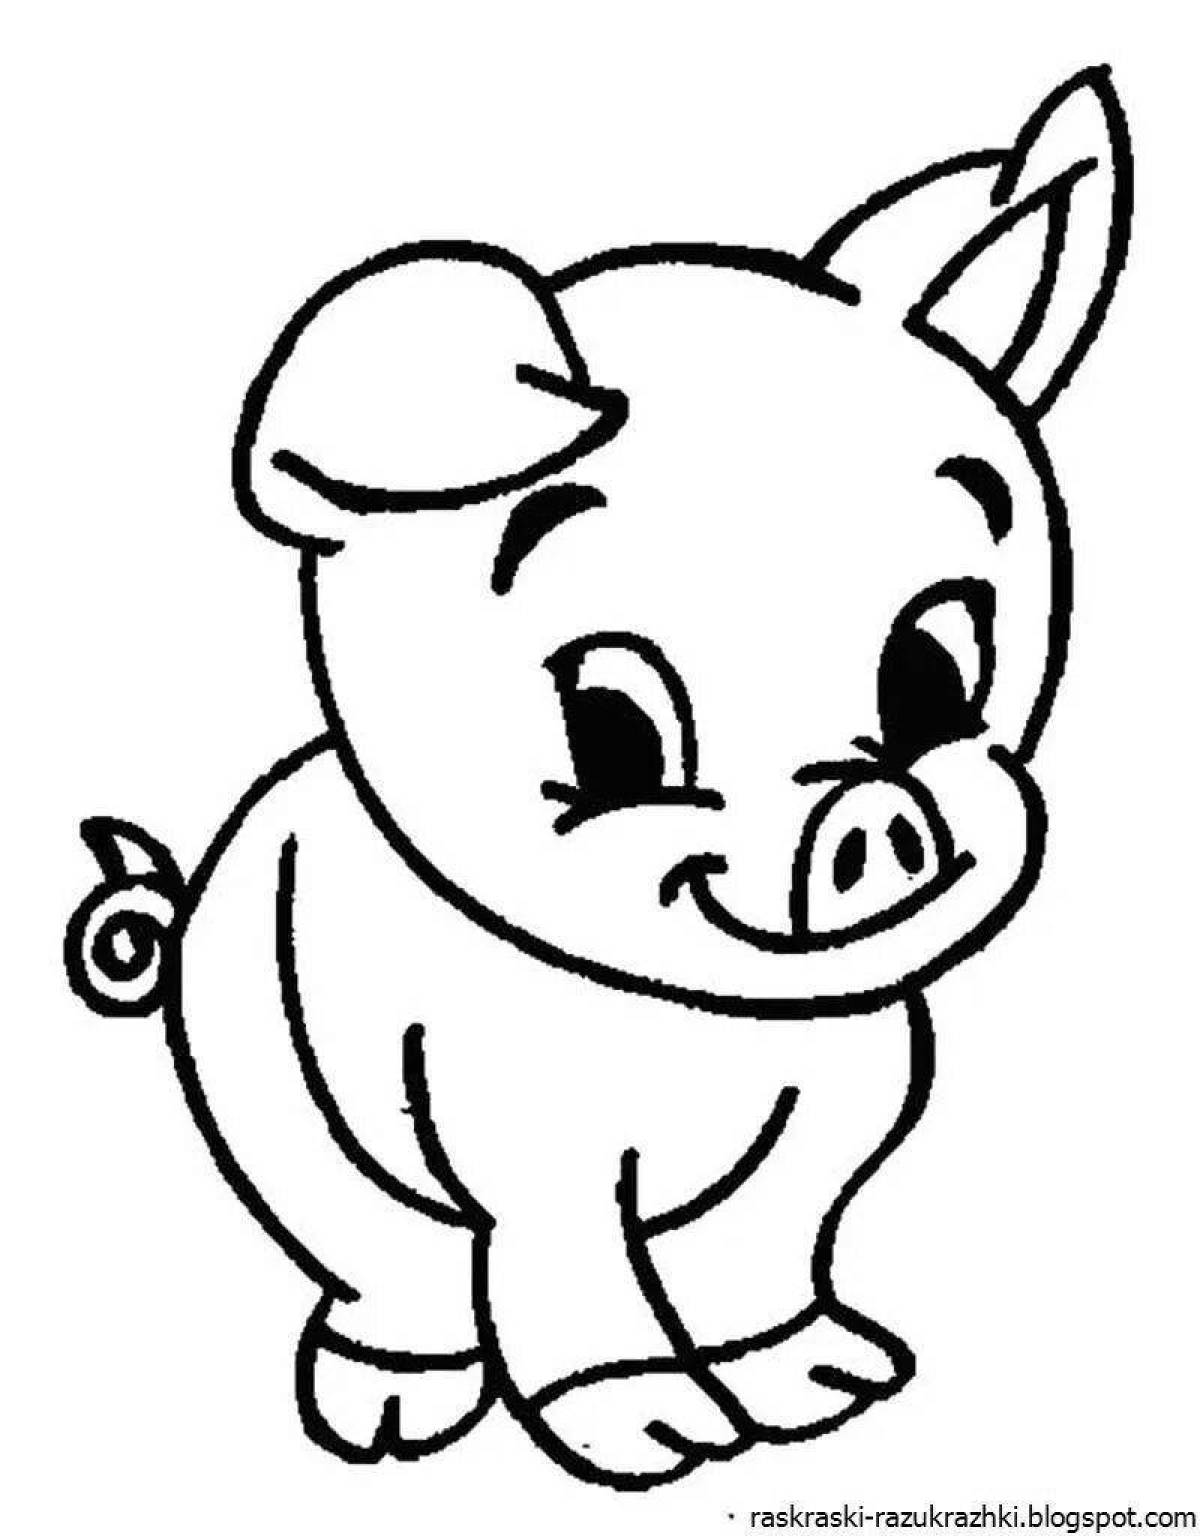 Adorable pig coloring book for kids